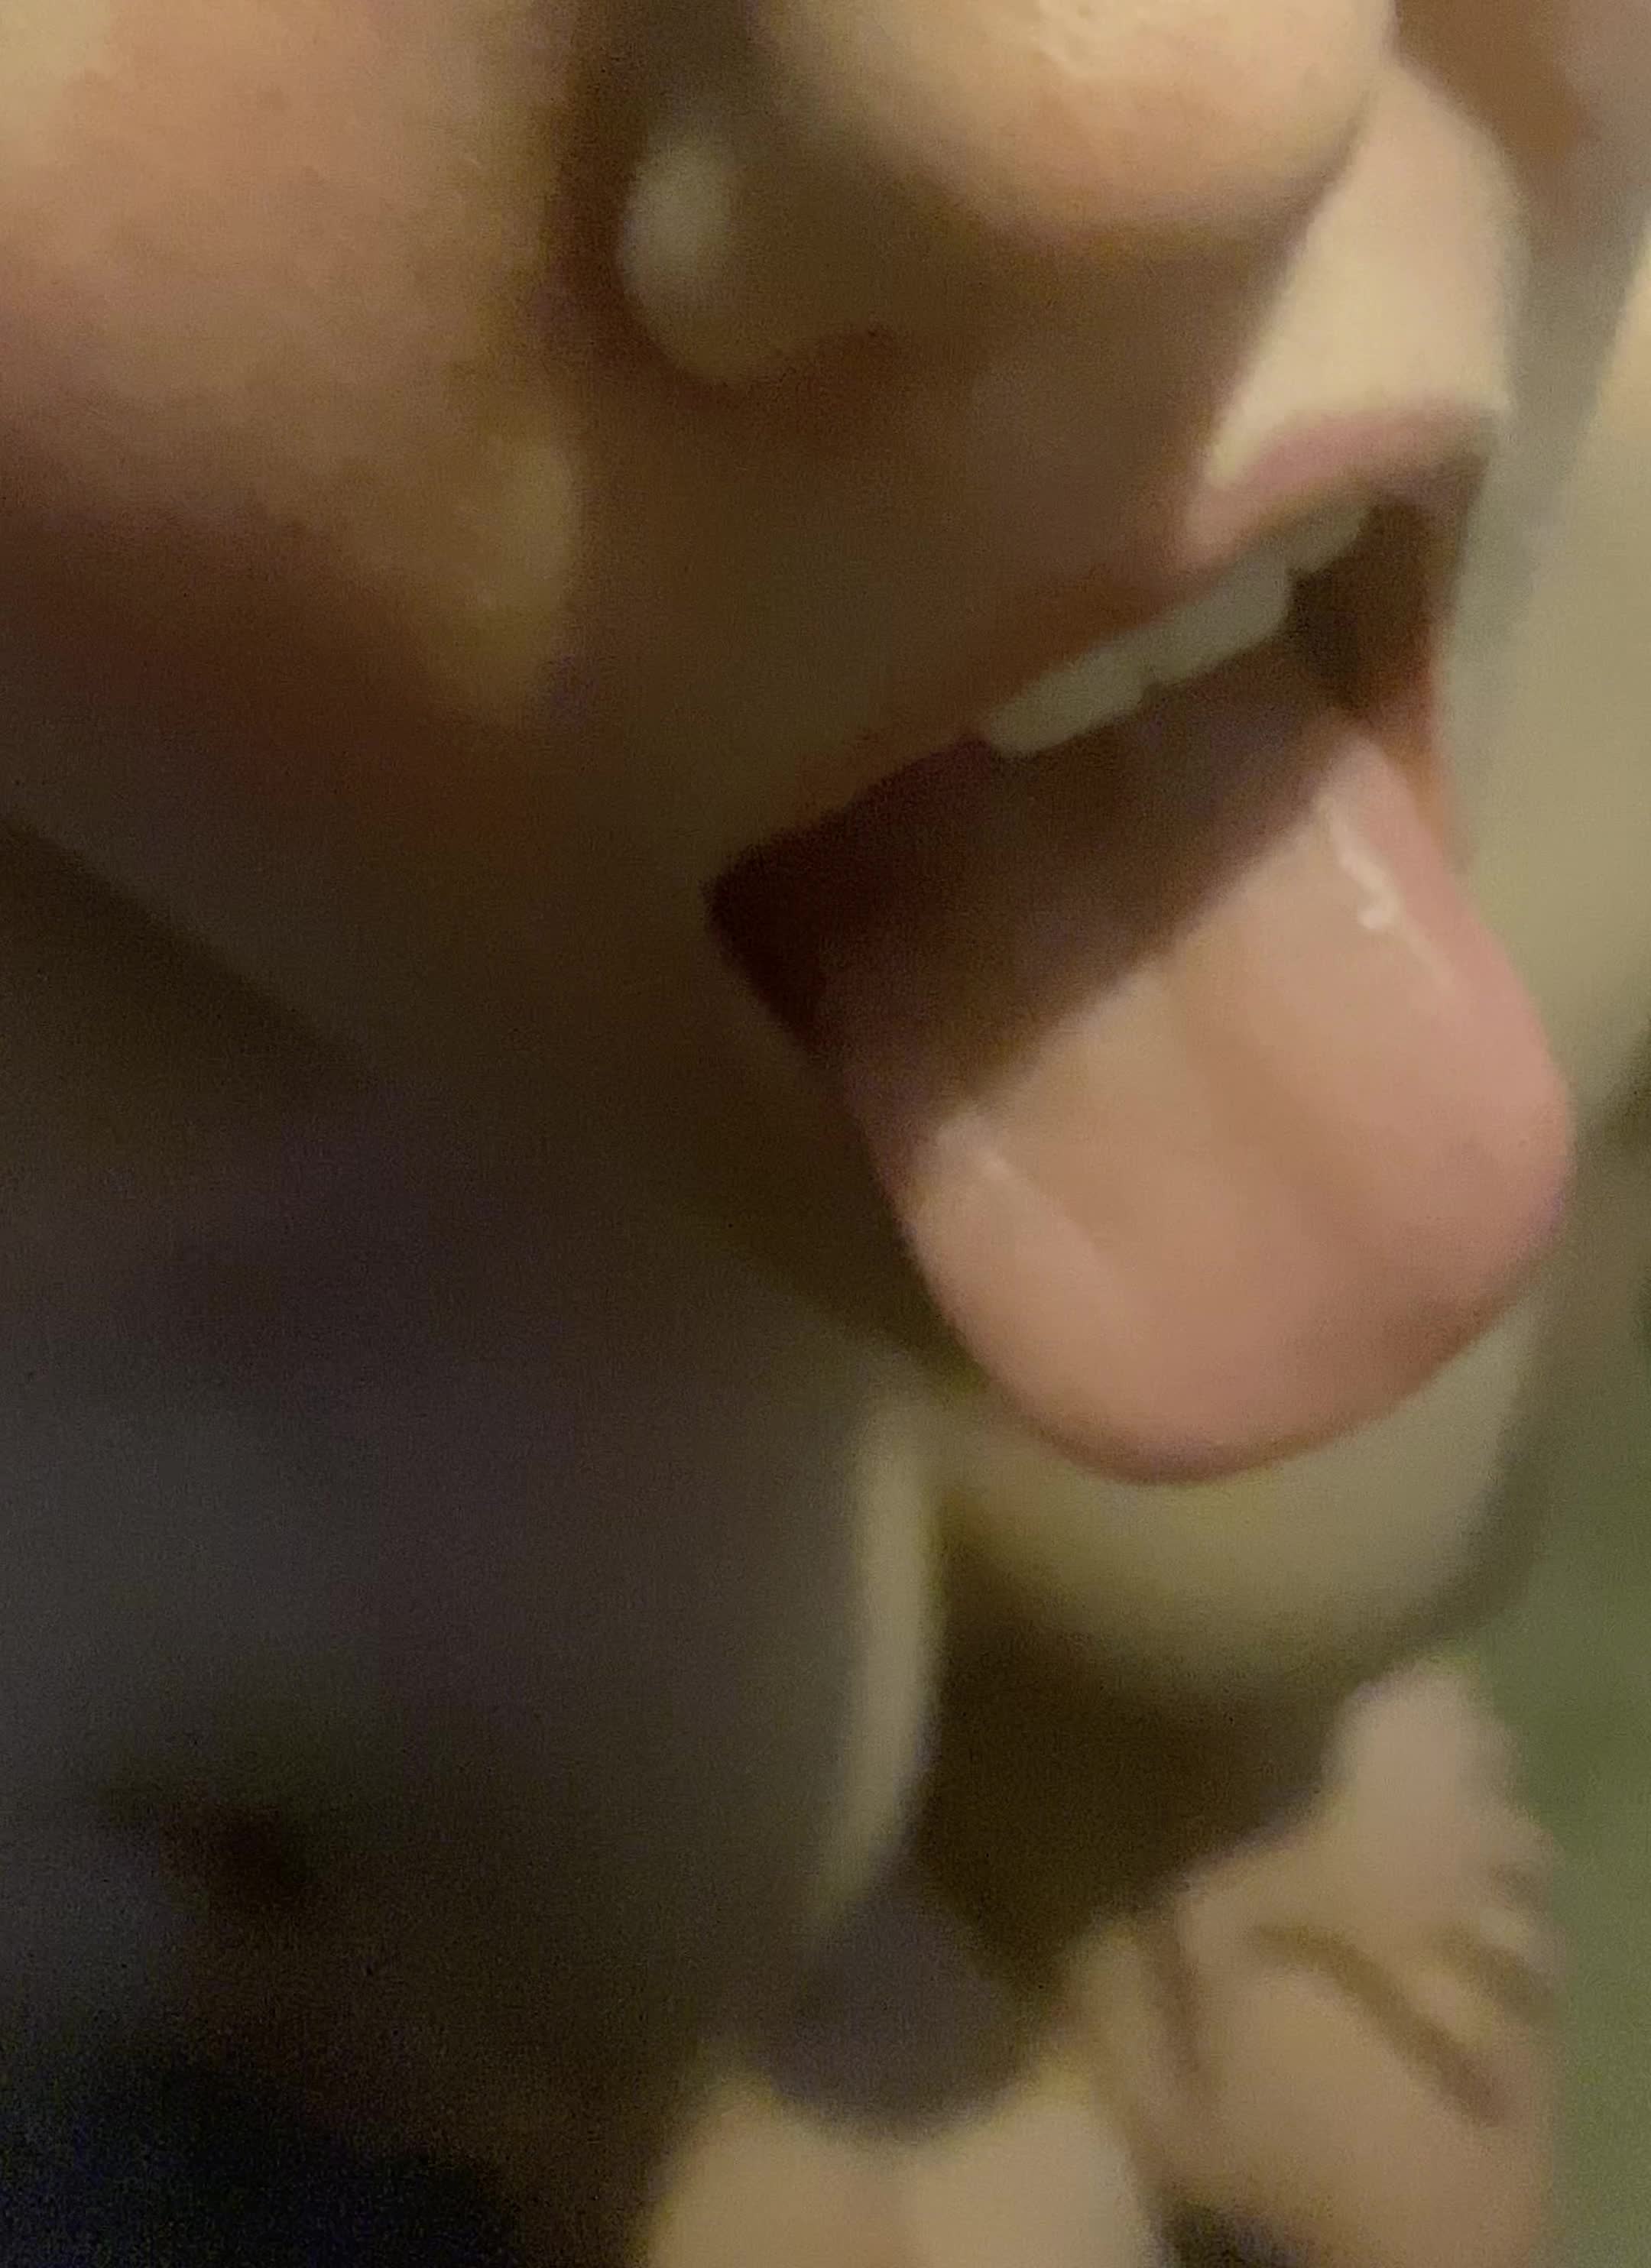 Love taking a load of cum on my tongue